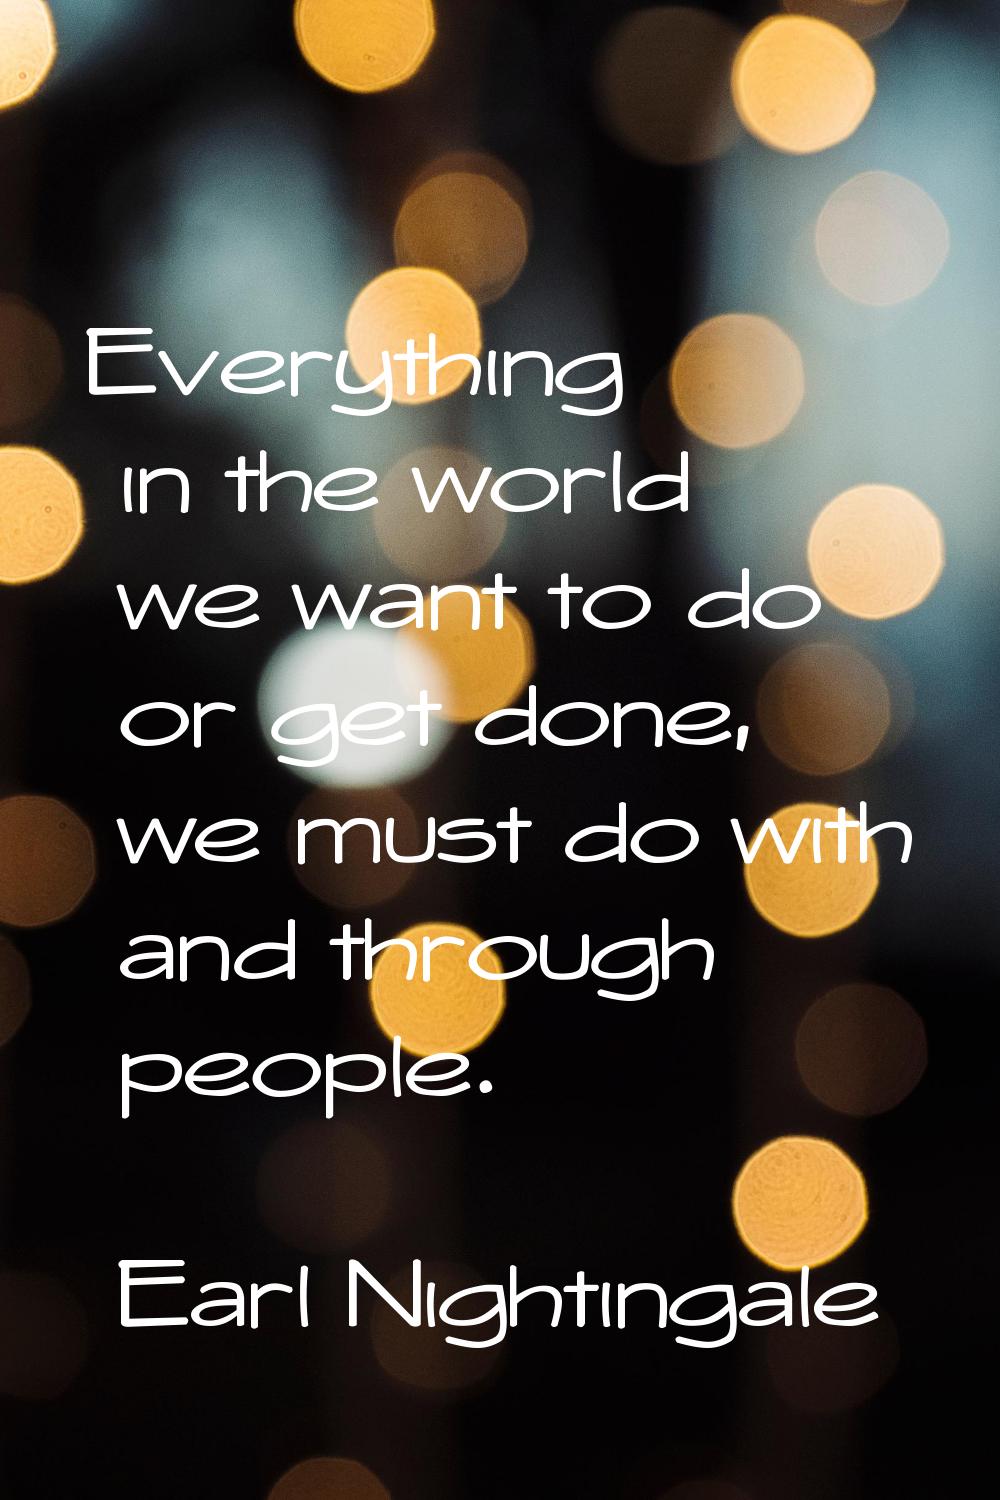 Everything in the world we want to do or get done, we must do with and through people.